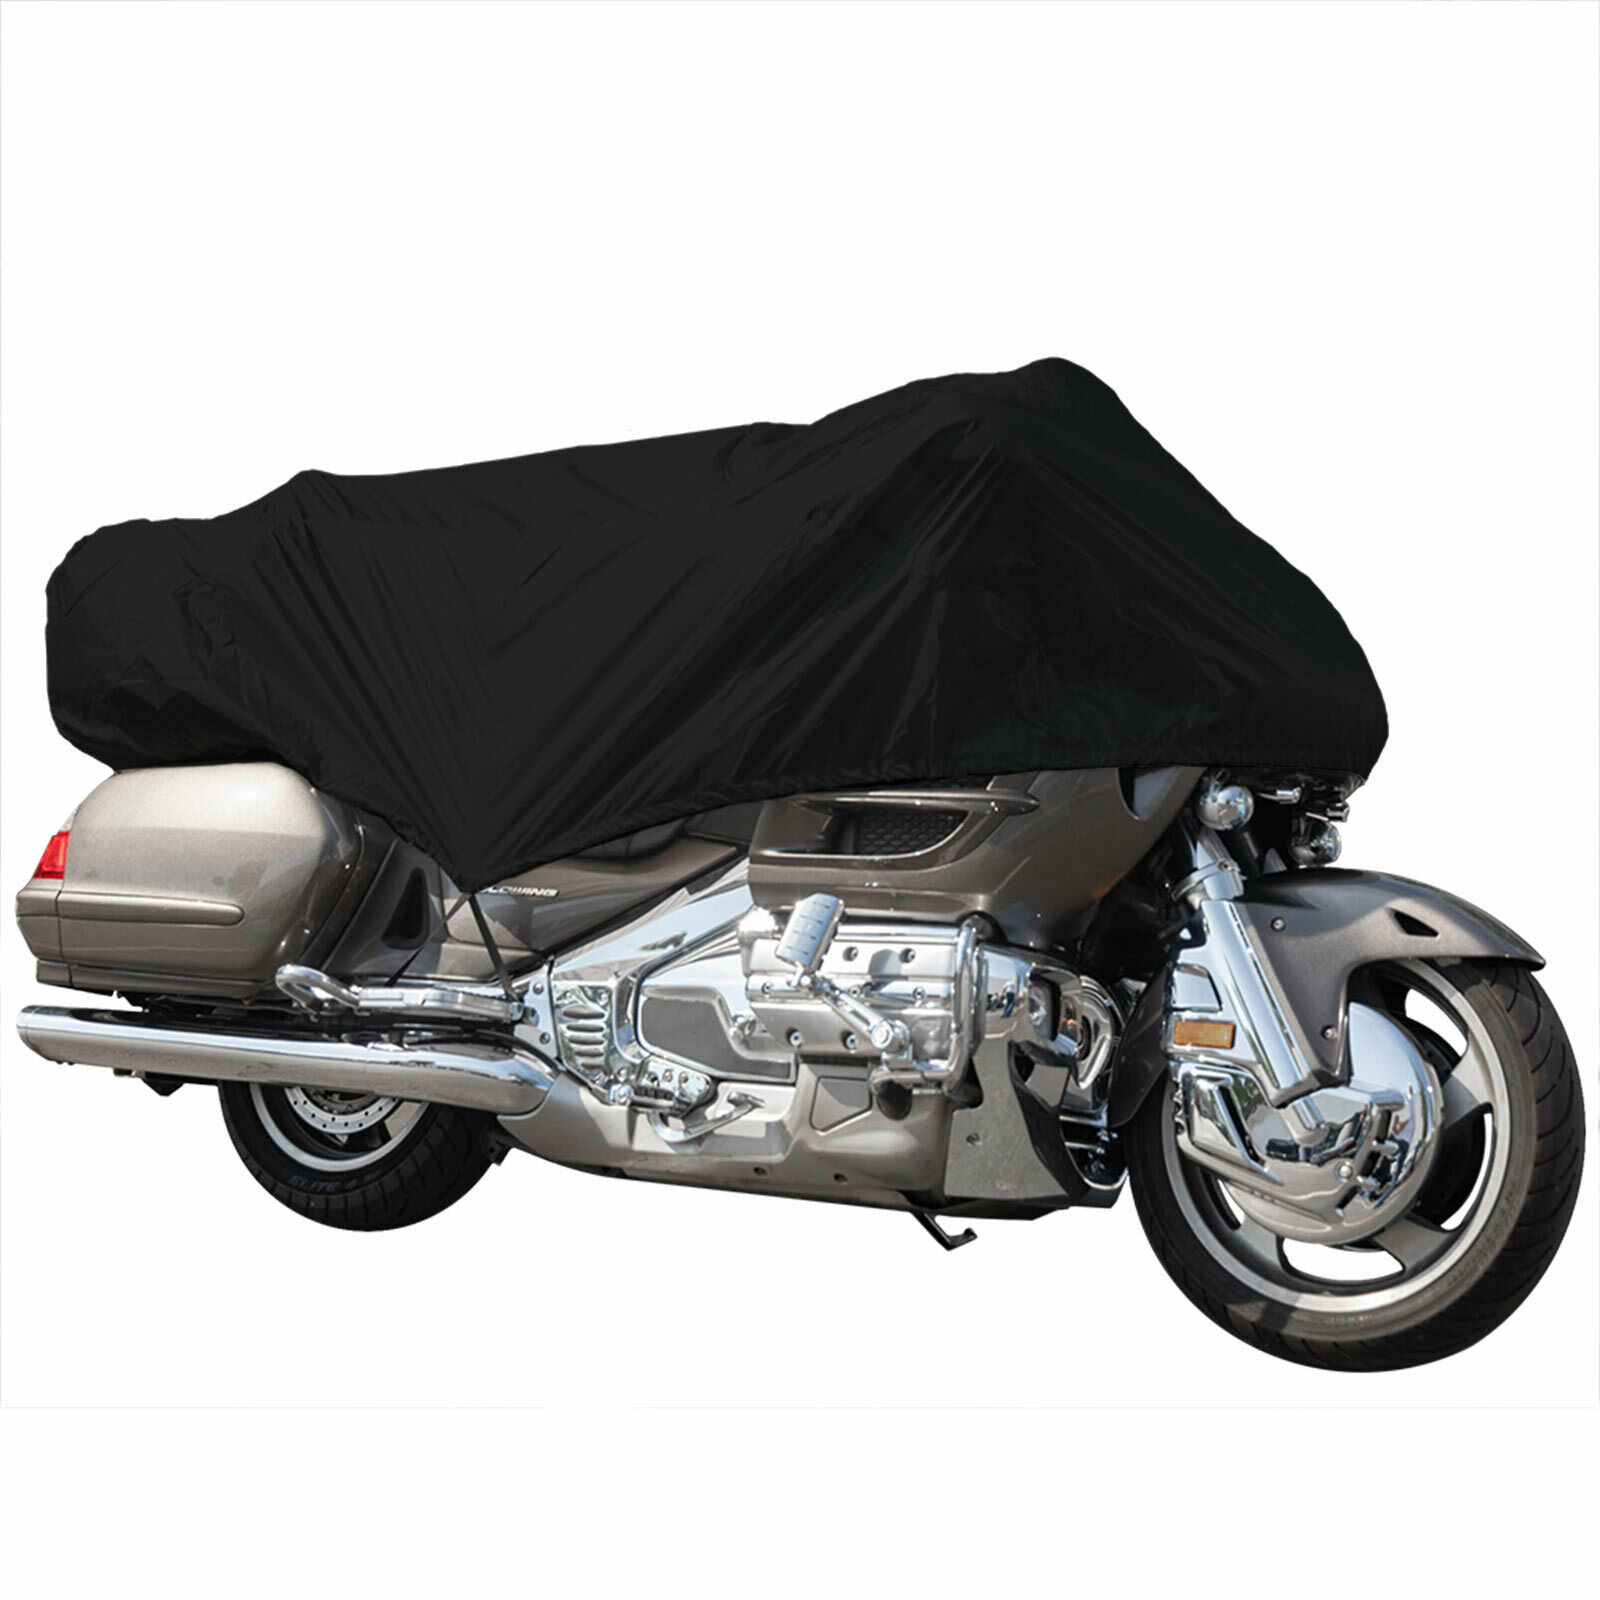 Lightweight Outdoor Rain & Dust Protector Travel Half Cover For Motorcycles